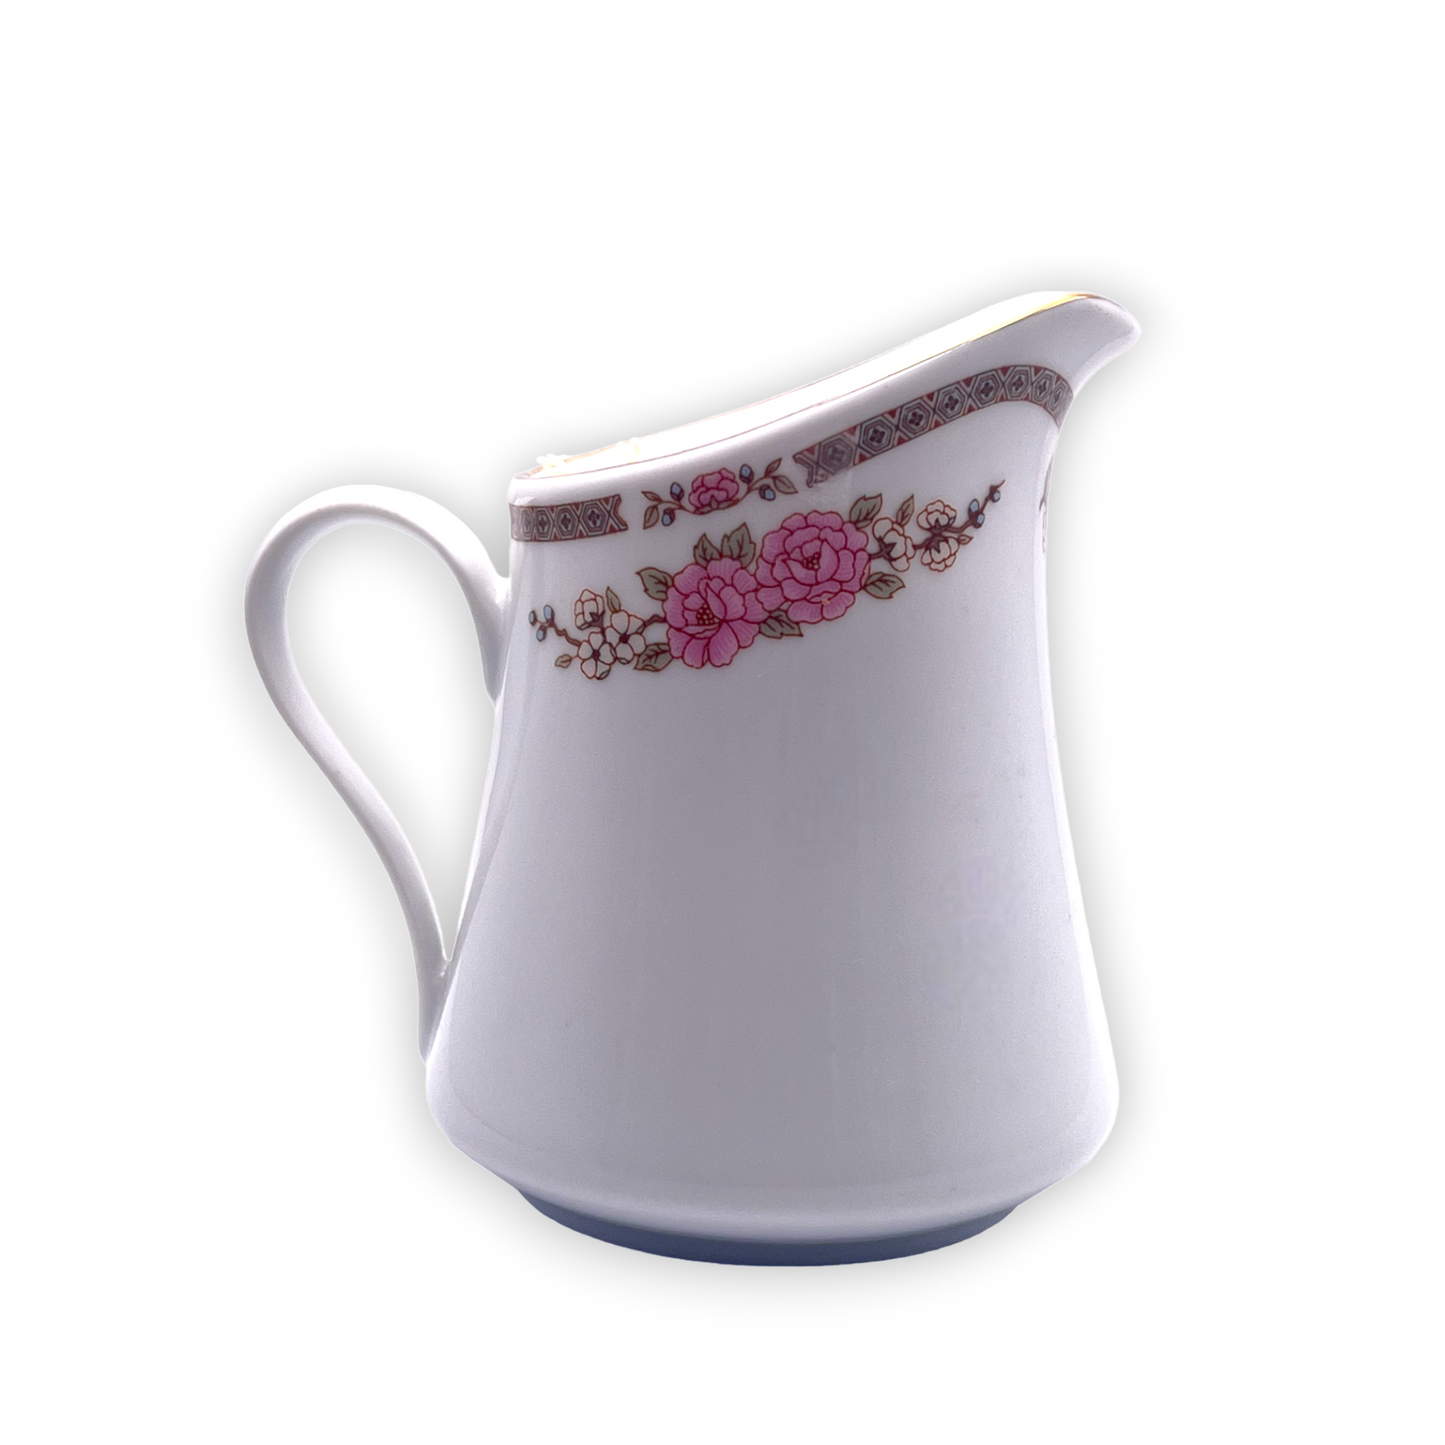 Chinese Yung Shen's Fairfield Vintage Creamer Candle